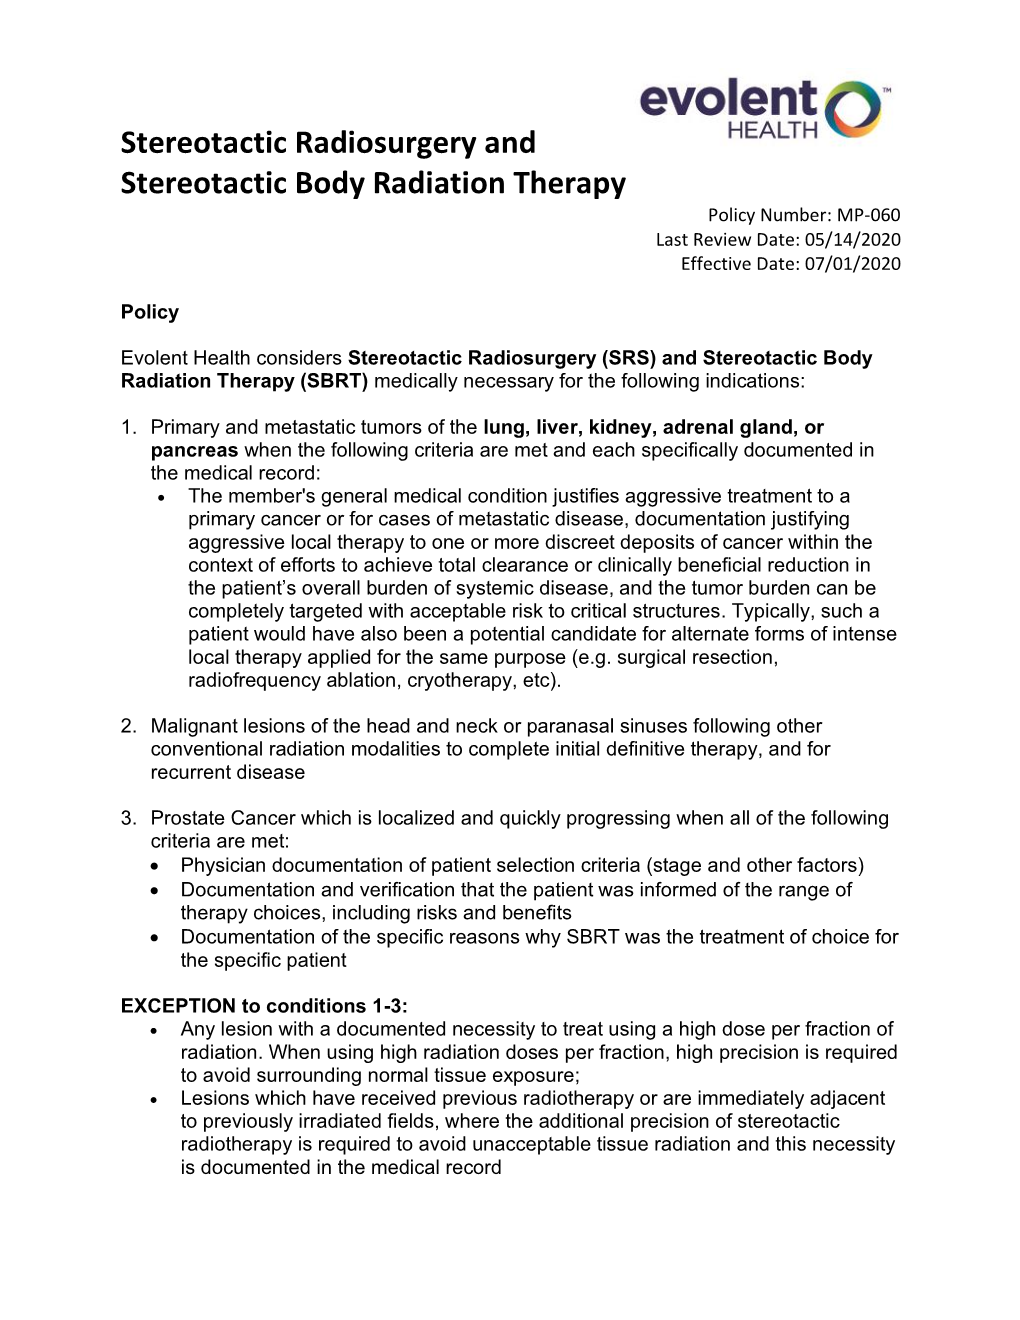 Stereotactic Radiosurgery and Stereotactic Body Radiation Therapy Policy Number: MP-060 Last Review Date: 05/14/2020 Effective Date: 07/01/2020